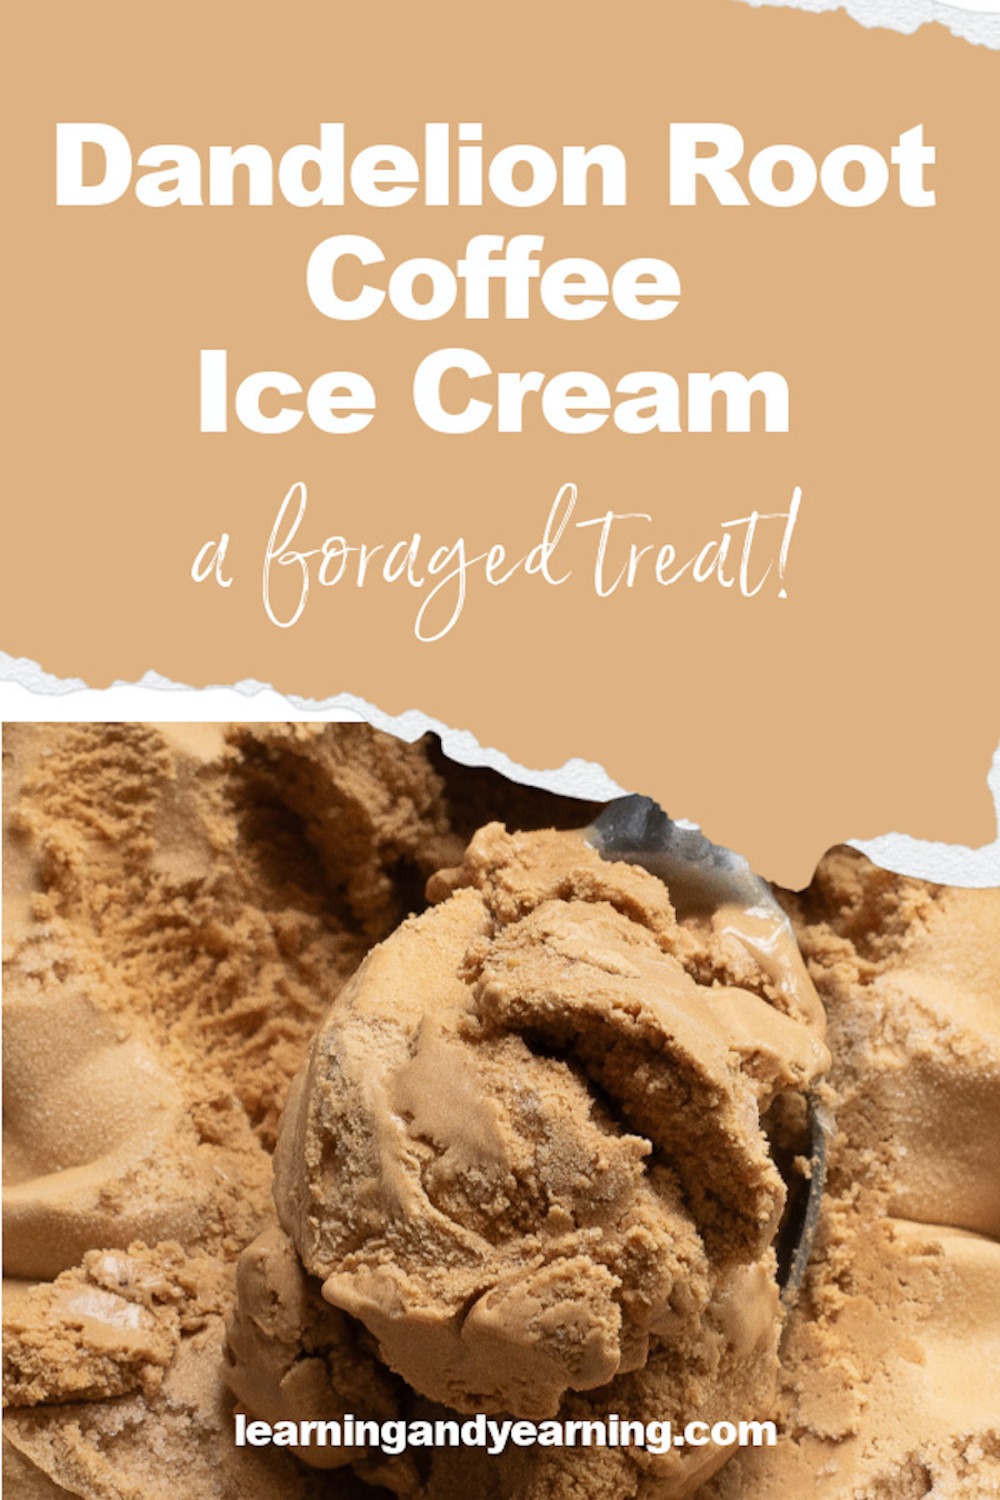 Forage some dandelion root and roast it to make coffee. Then use that dandelion coffee to create this delicious coffee ice cream!